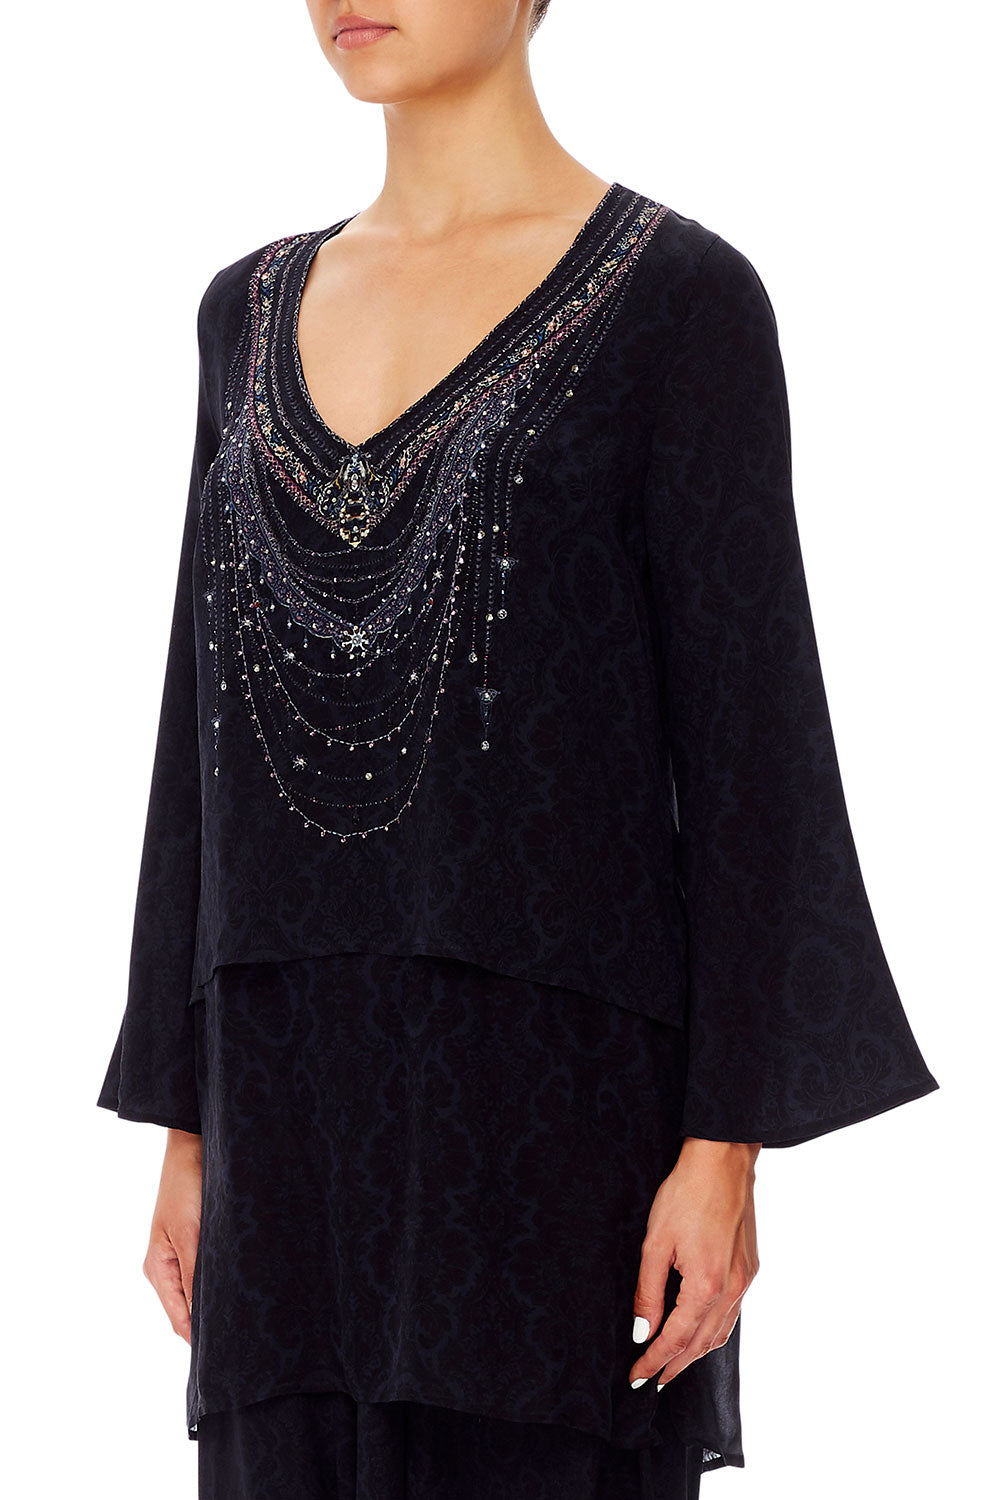 BLOUSE WITH SIDE SPLIT MIDNIGHT MEETING